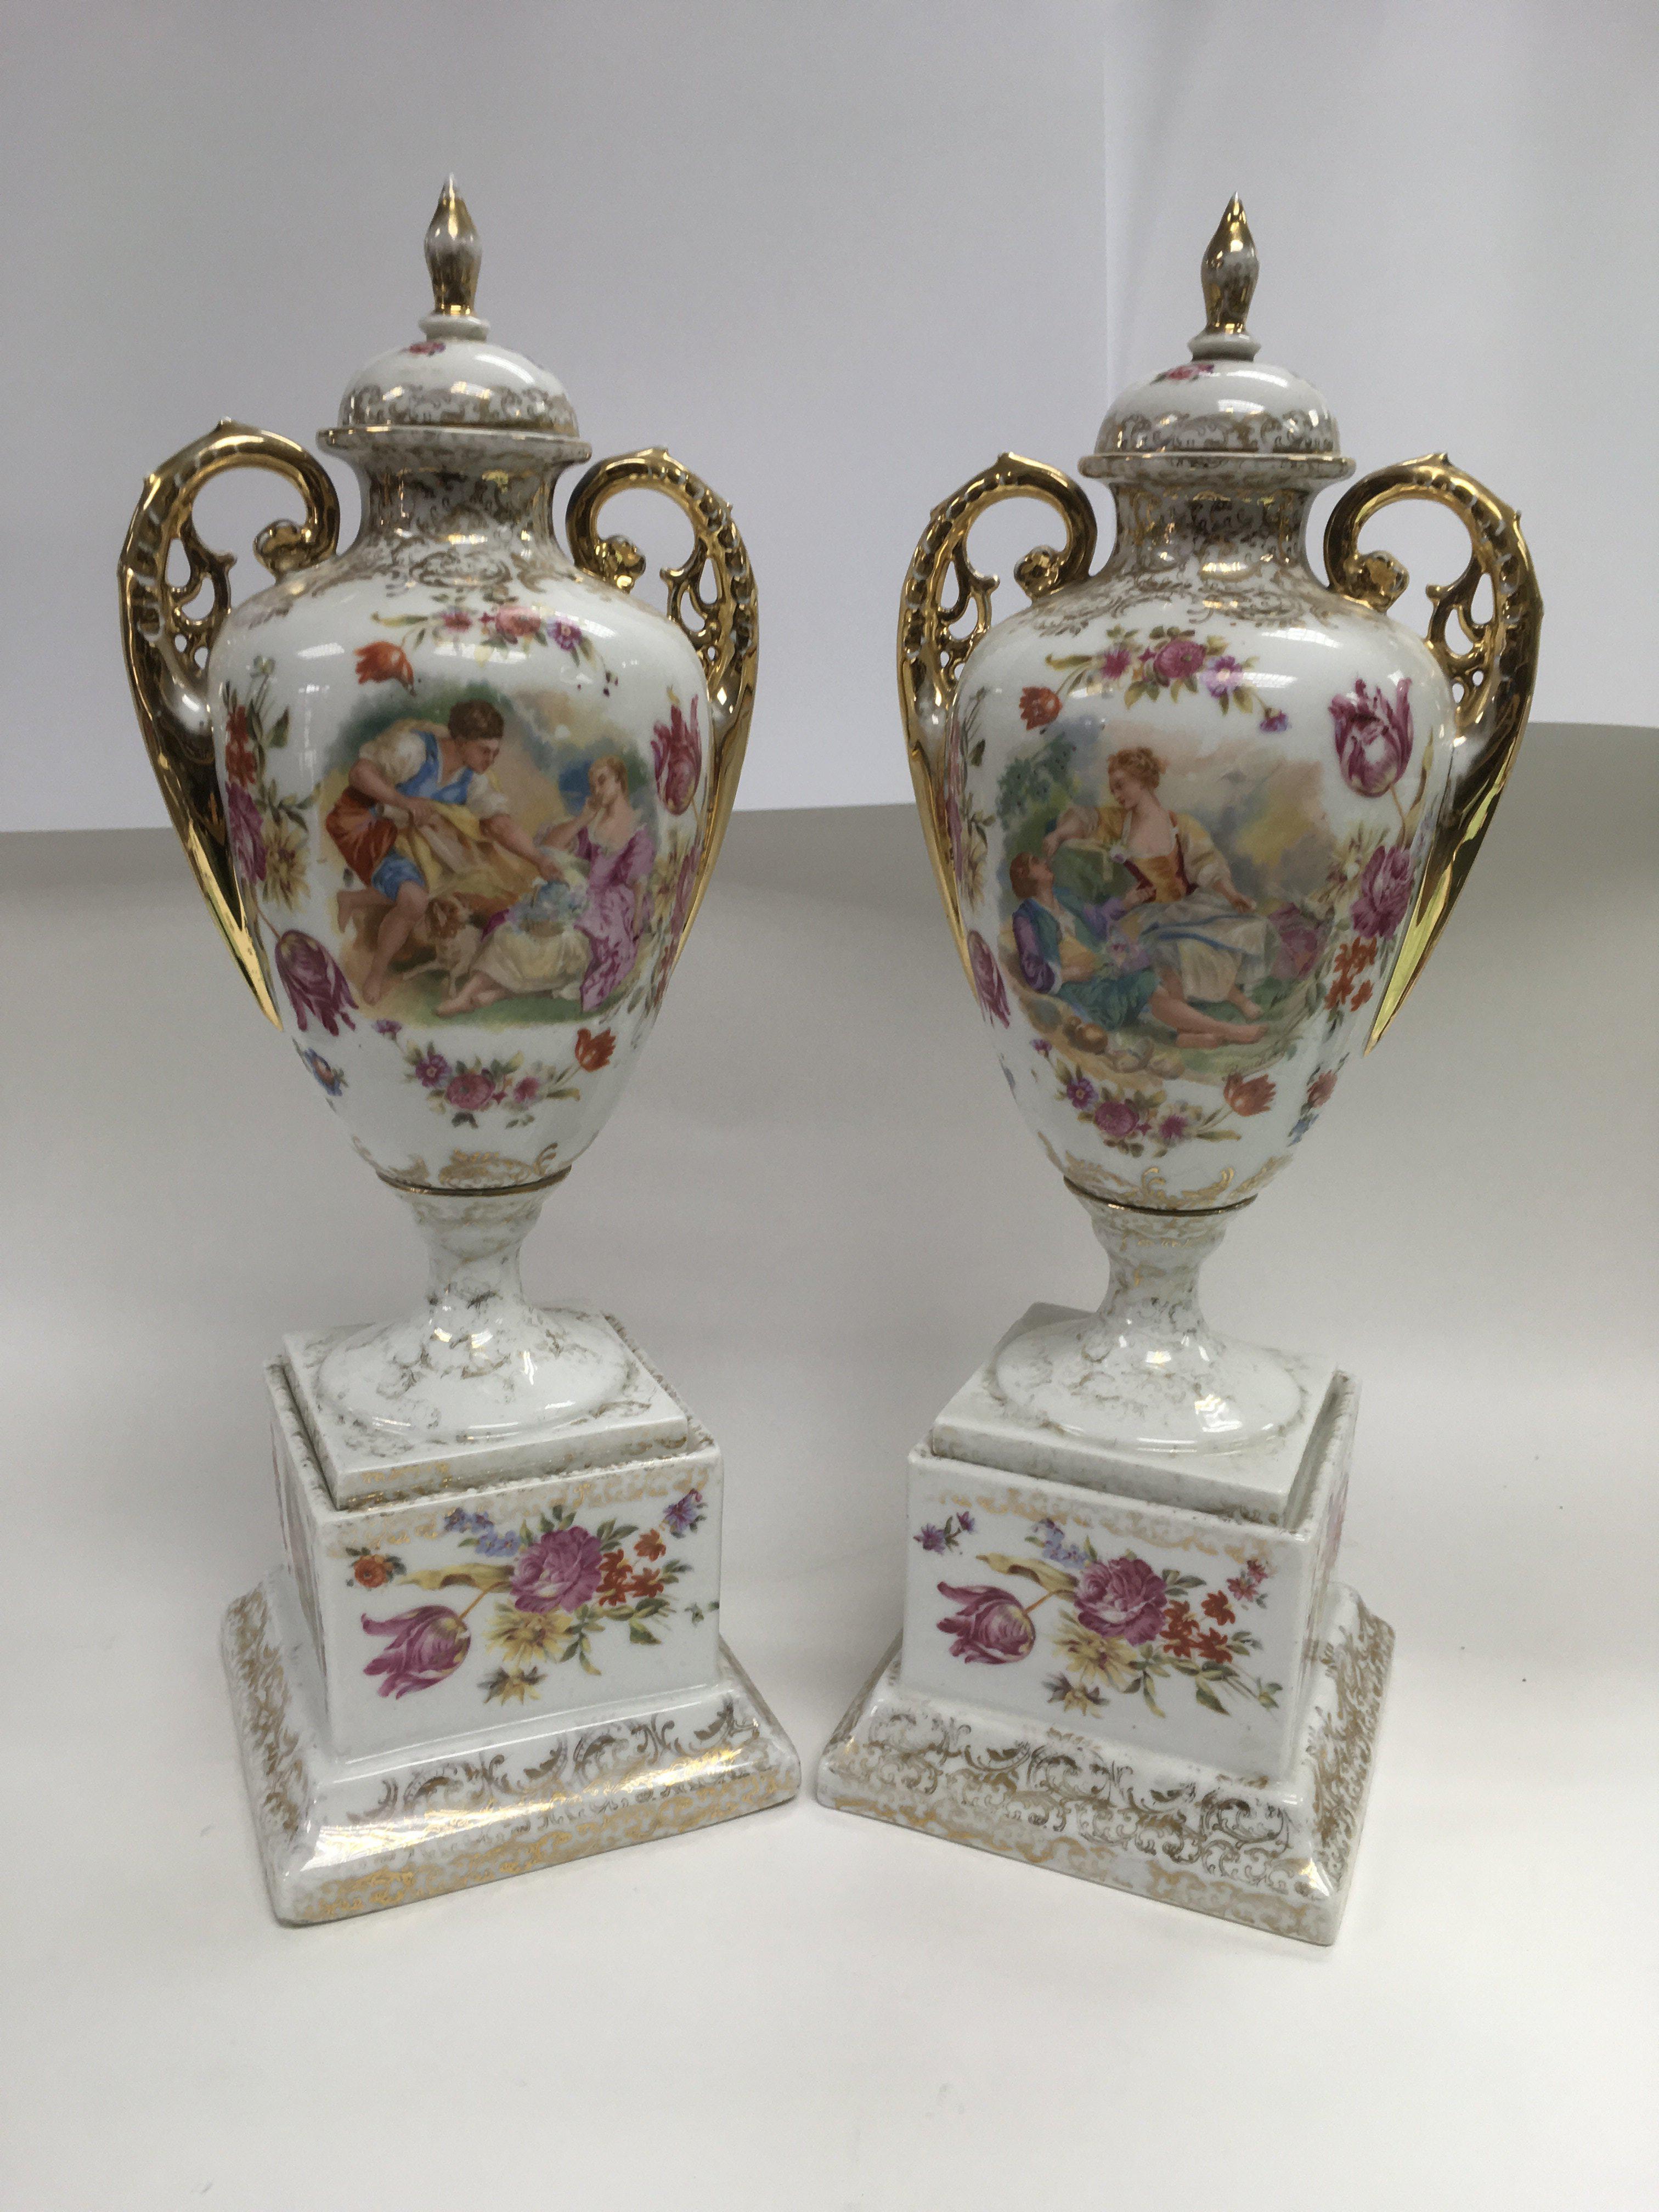 A pair of ceramic lidded vases with transfer print